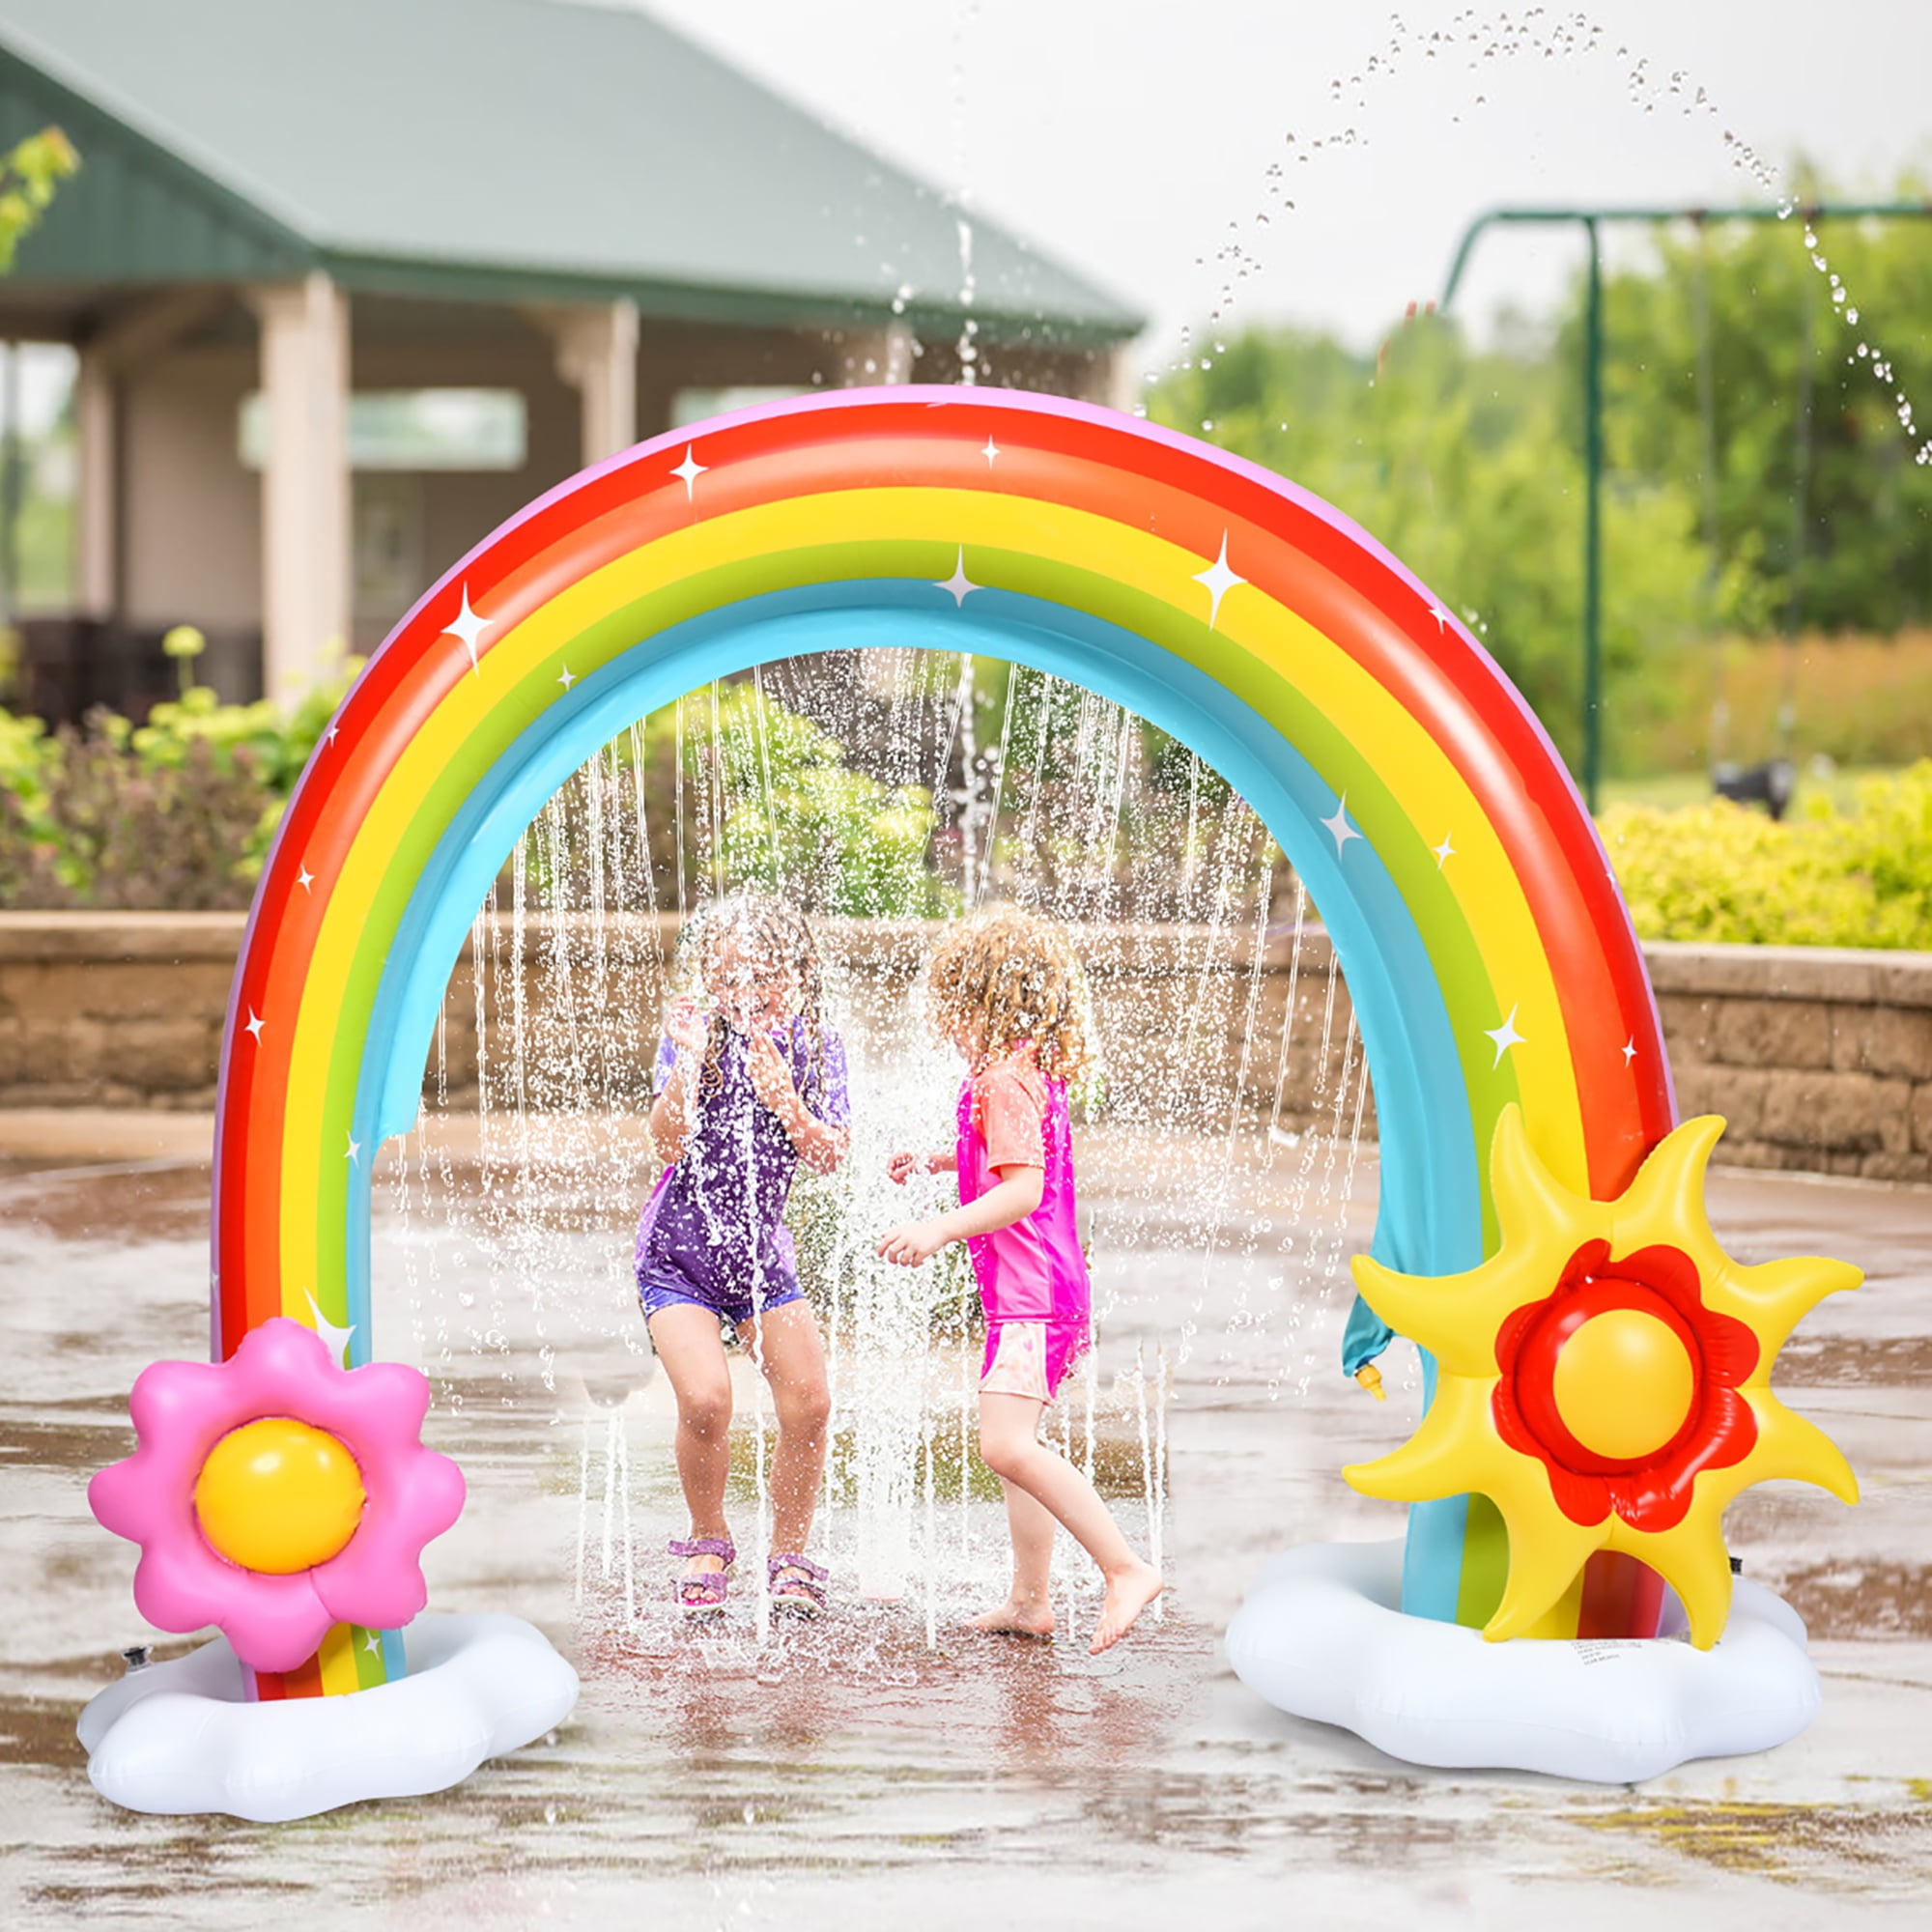 Giant Kids Summer Inflatable Water Sprinkler Fun Party Garden Rainbow Arch Toys 